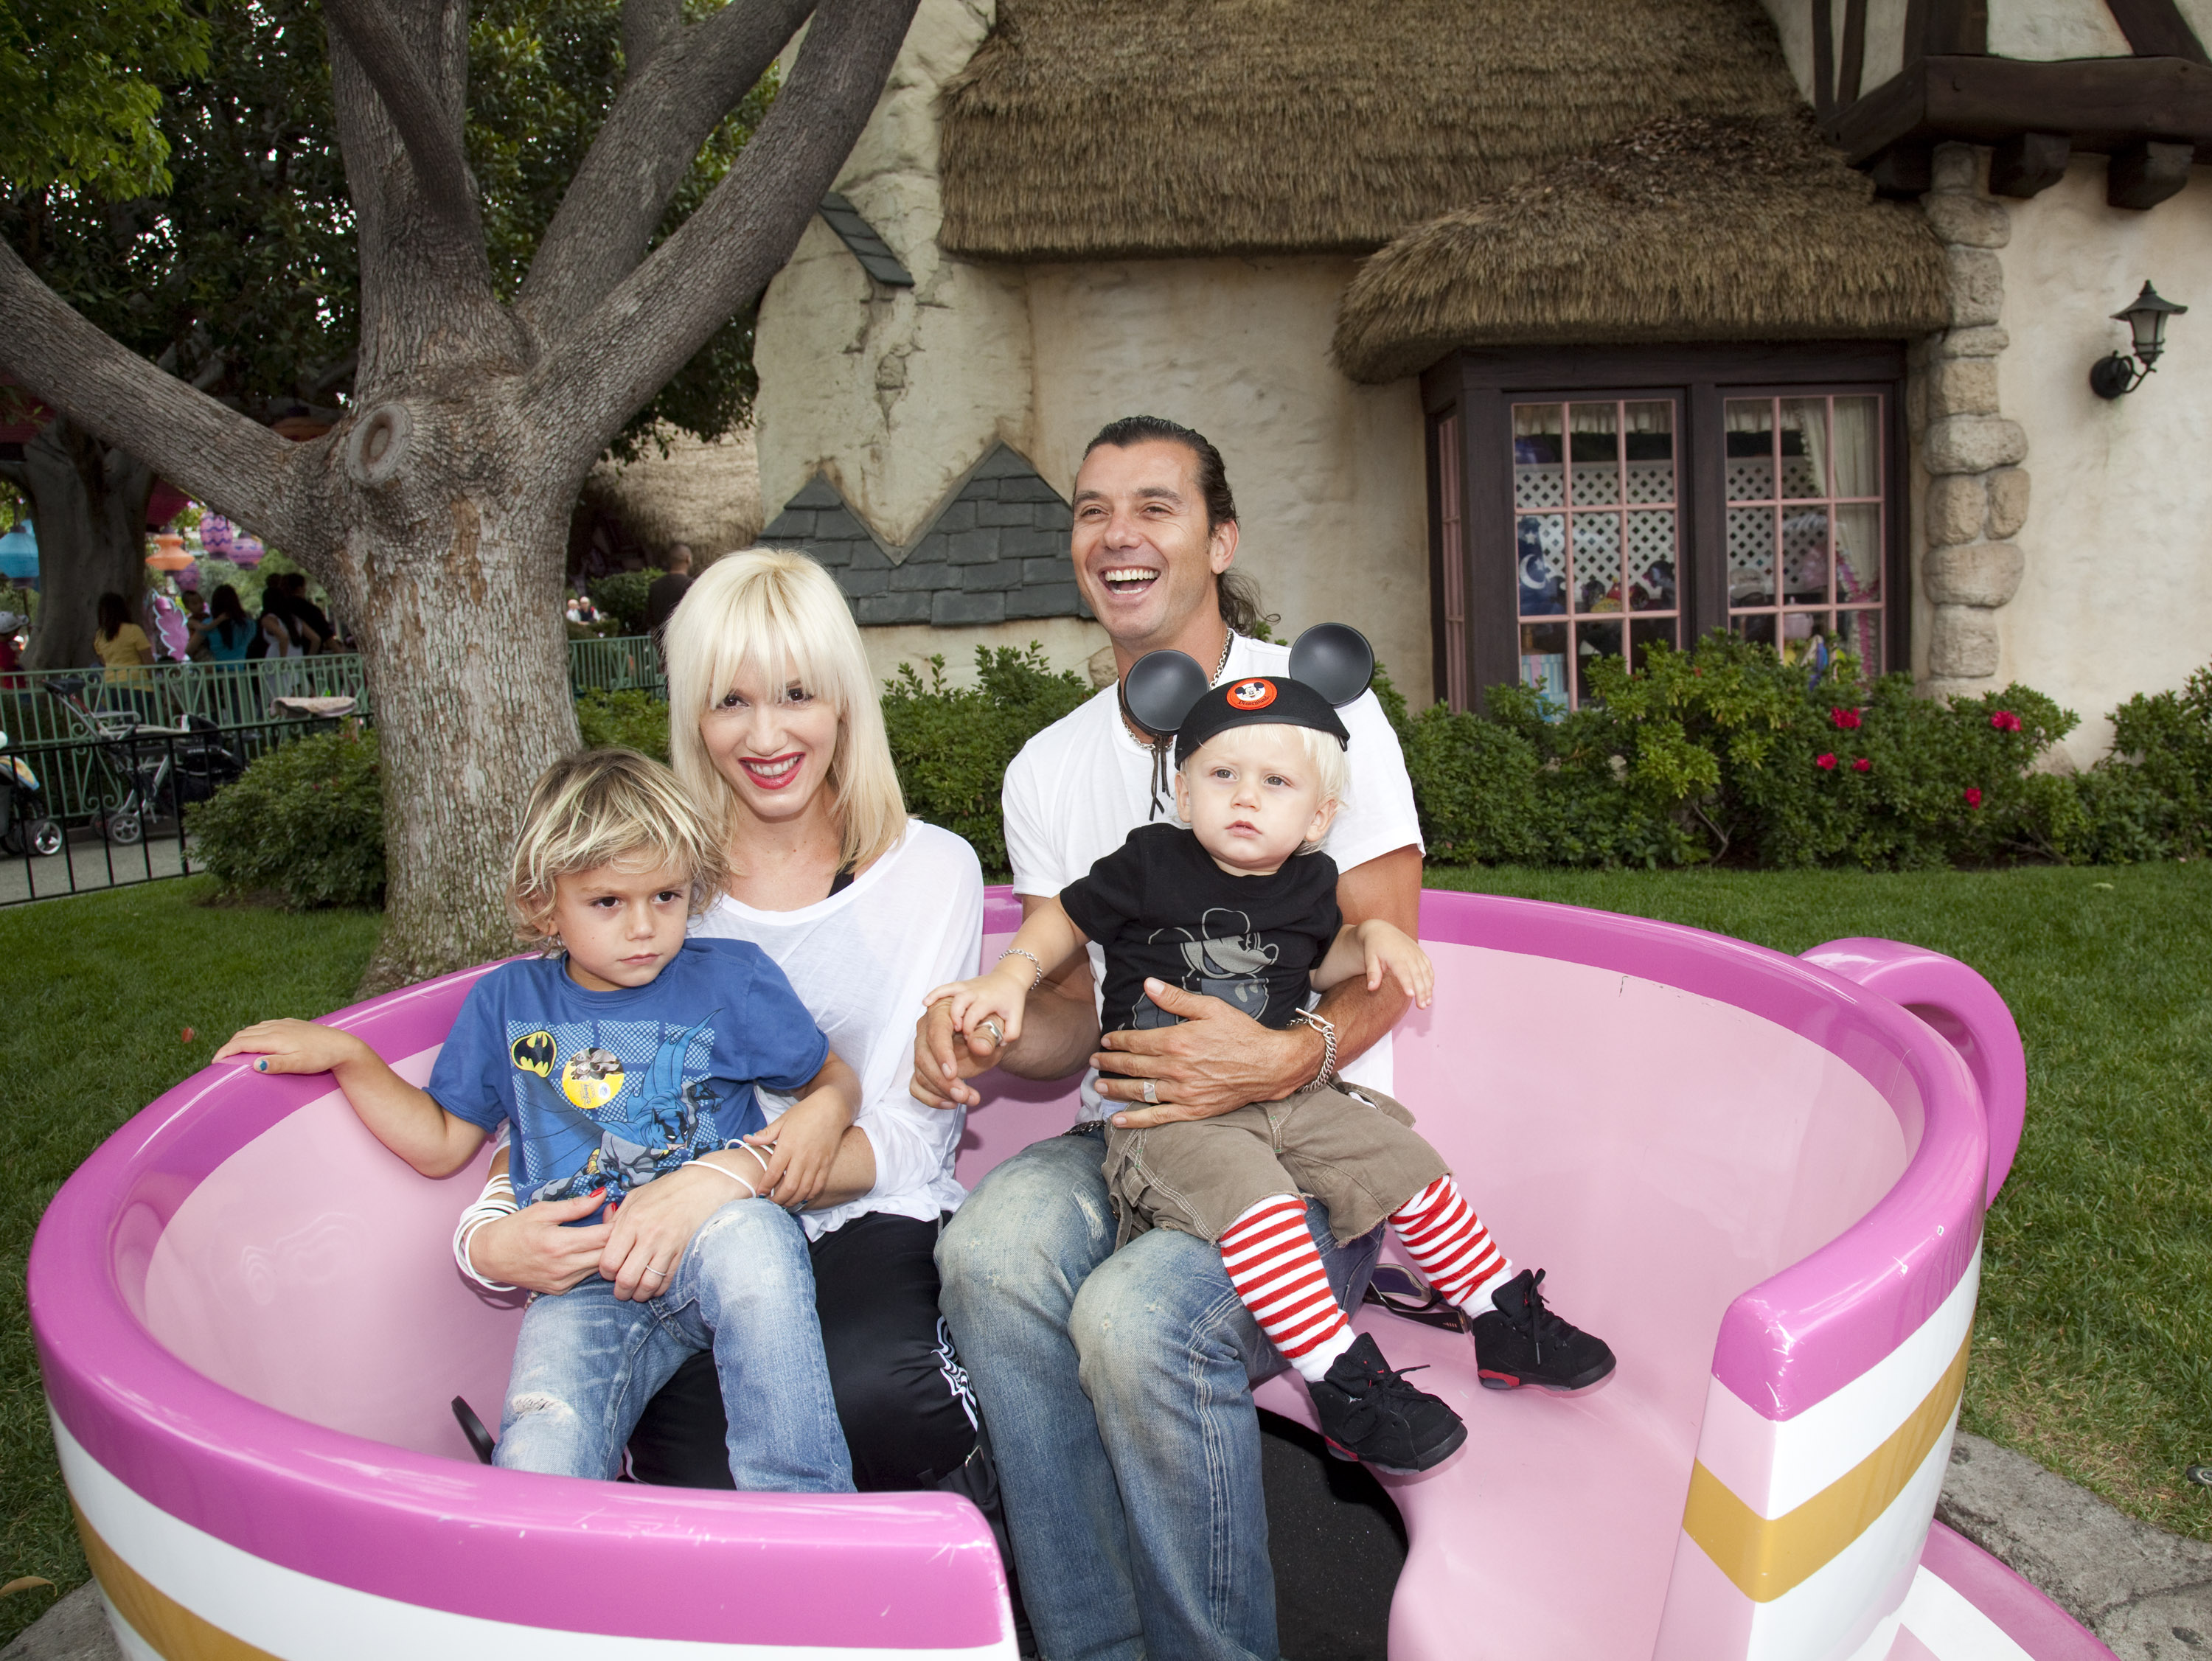 Gwen Stefani's and Gavin Rossdale with their children, Kingston and Zuma in Los Angeles in 2013 | Source: Getty Images